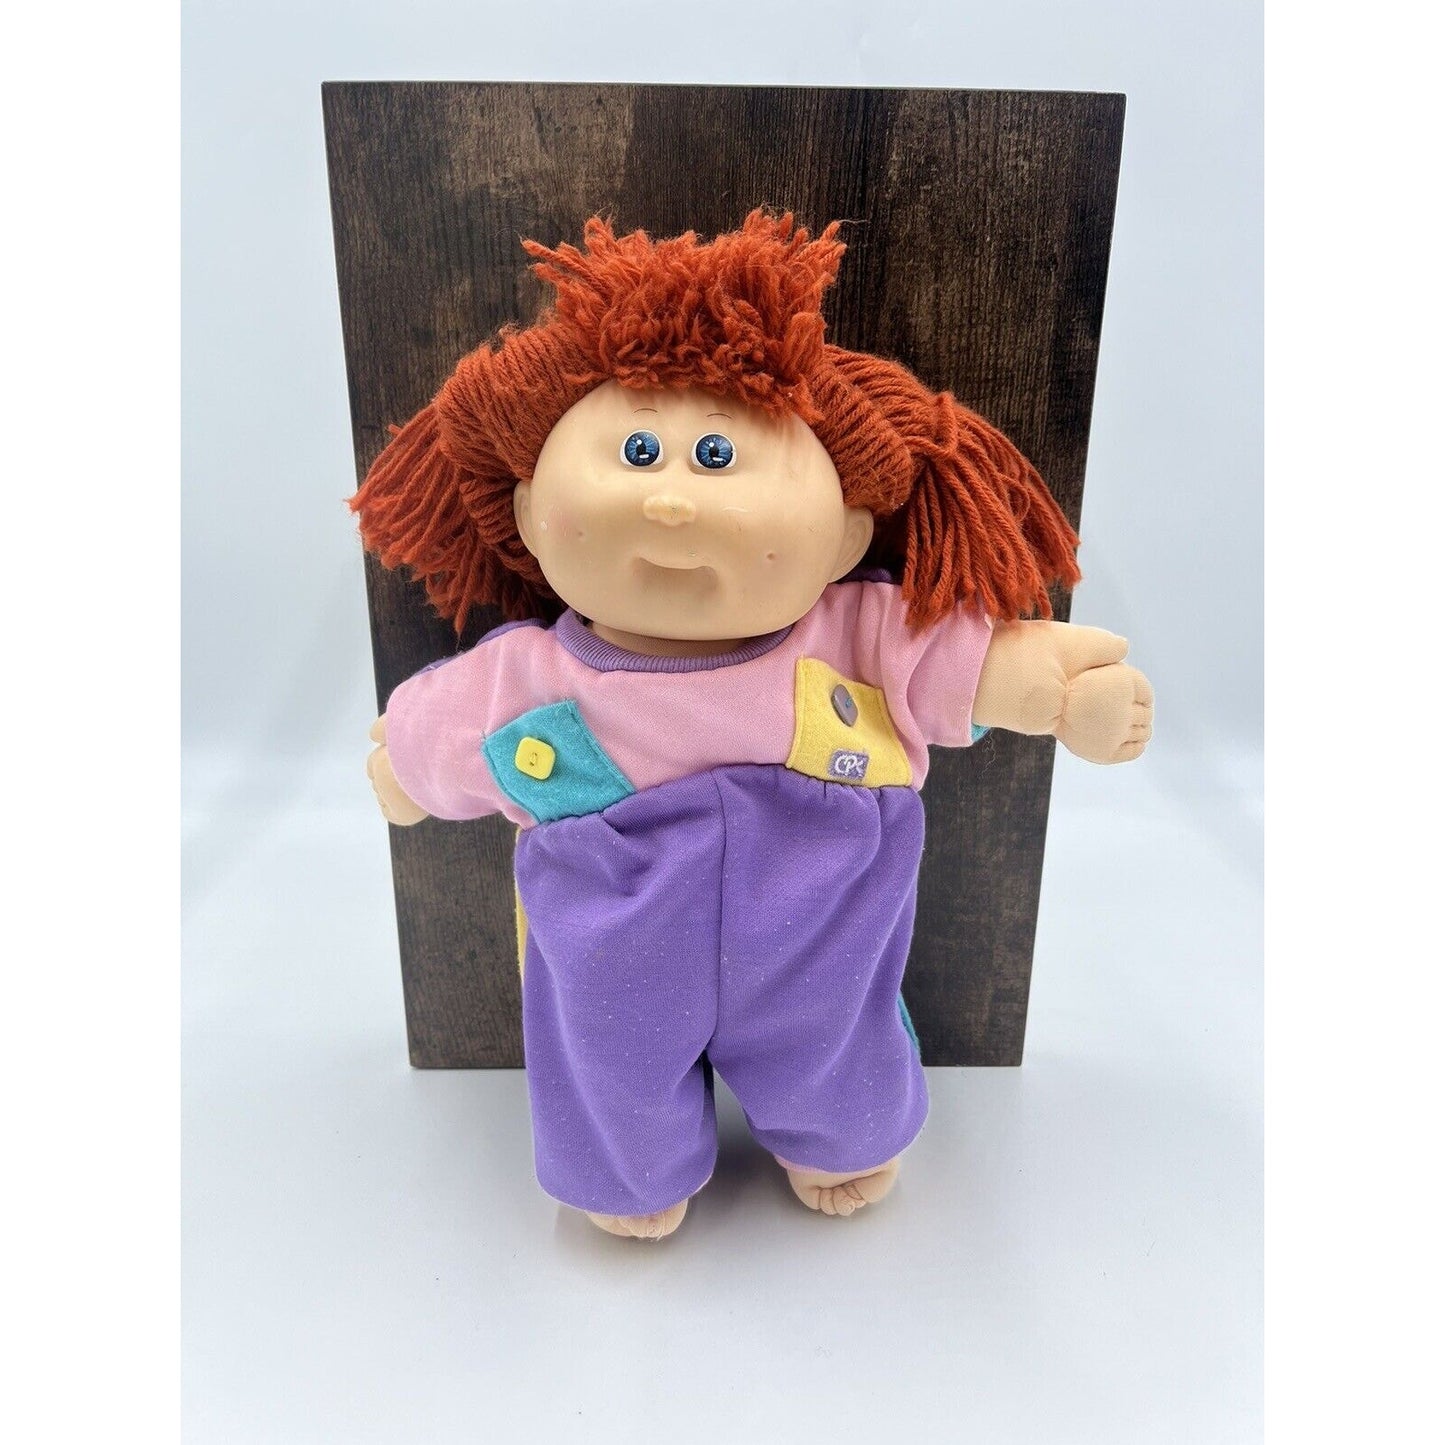 Vintage Cabbage Patch Kid Girl Doll Red Hair & Blue Eyes